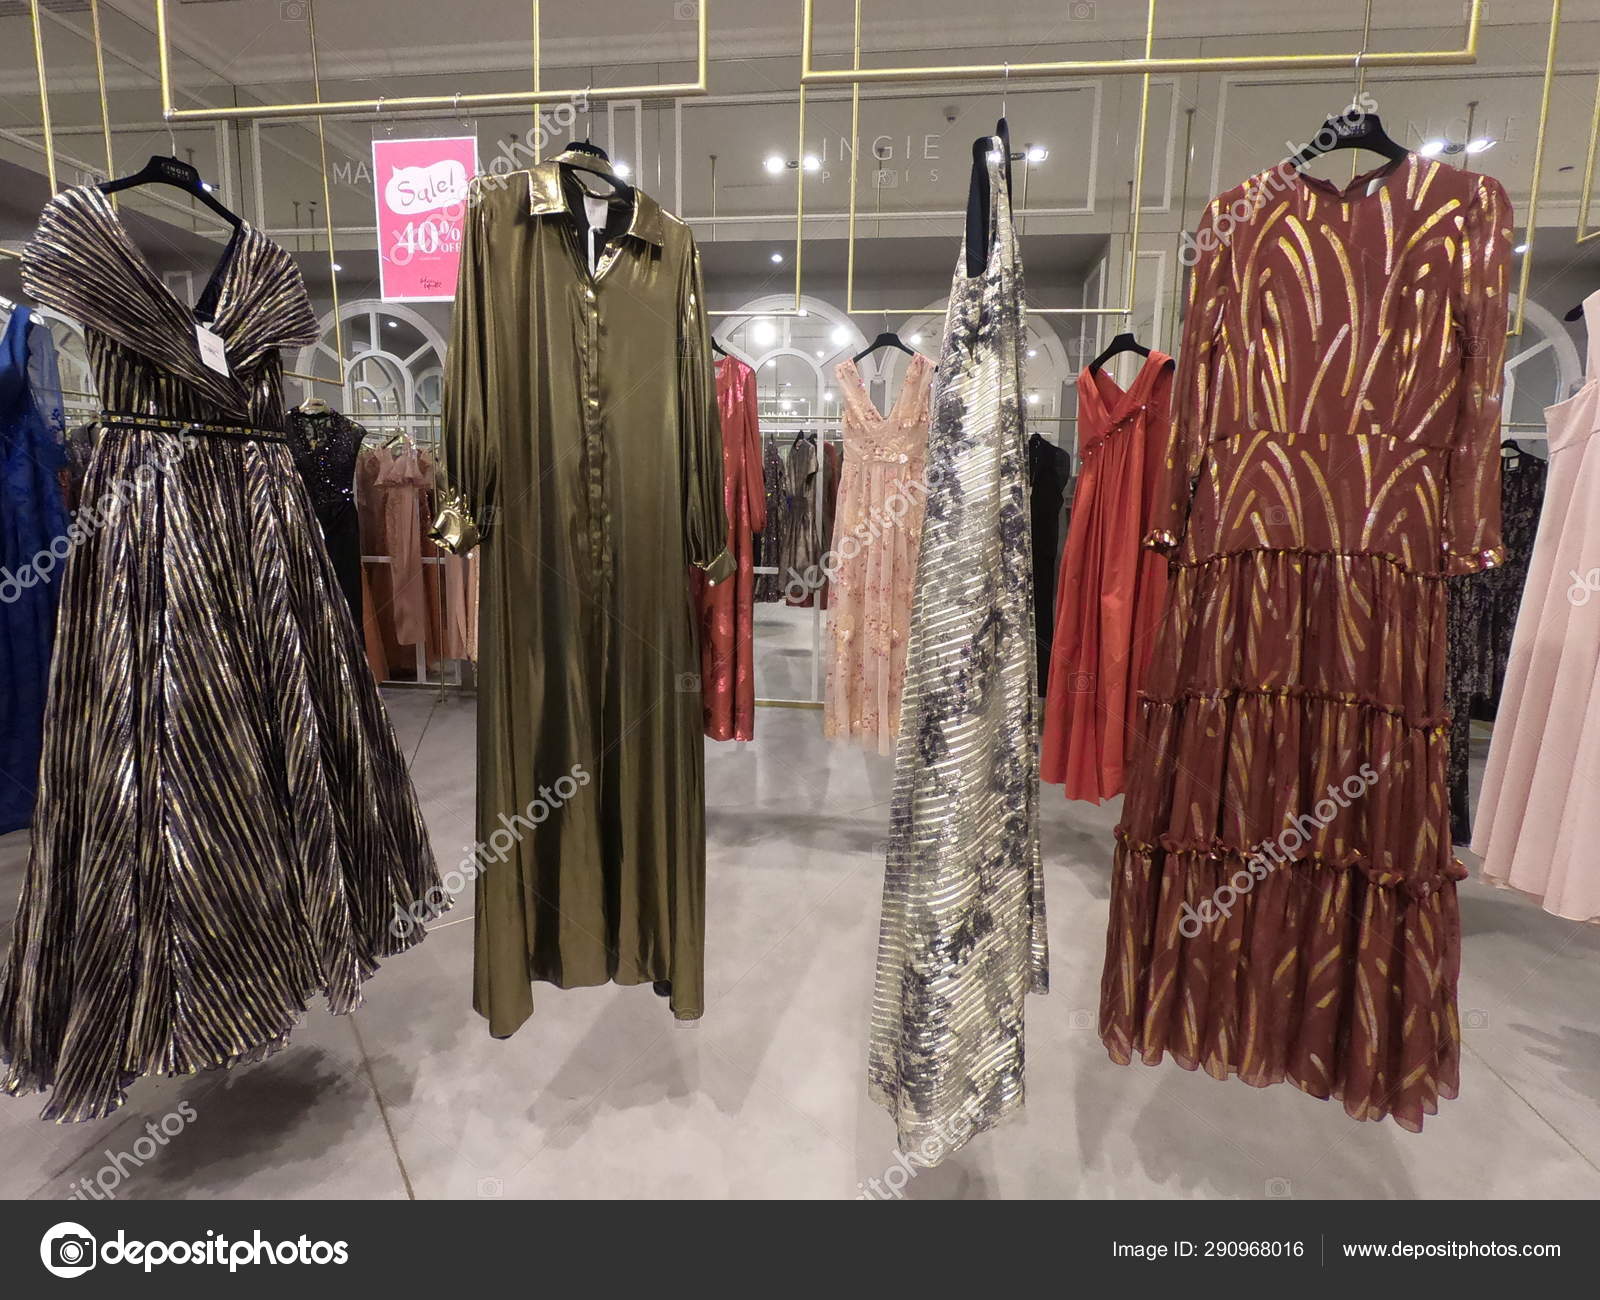 Dubai UAE - July 2019: Department of dresses in the women's clothing store.  A lot of female Evening Gowns, dresses displayed for sale on hangers in a  boutique clothing shop. – Stock